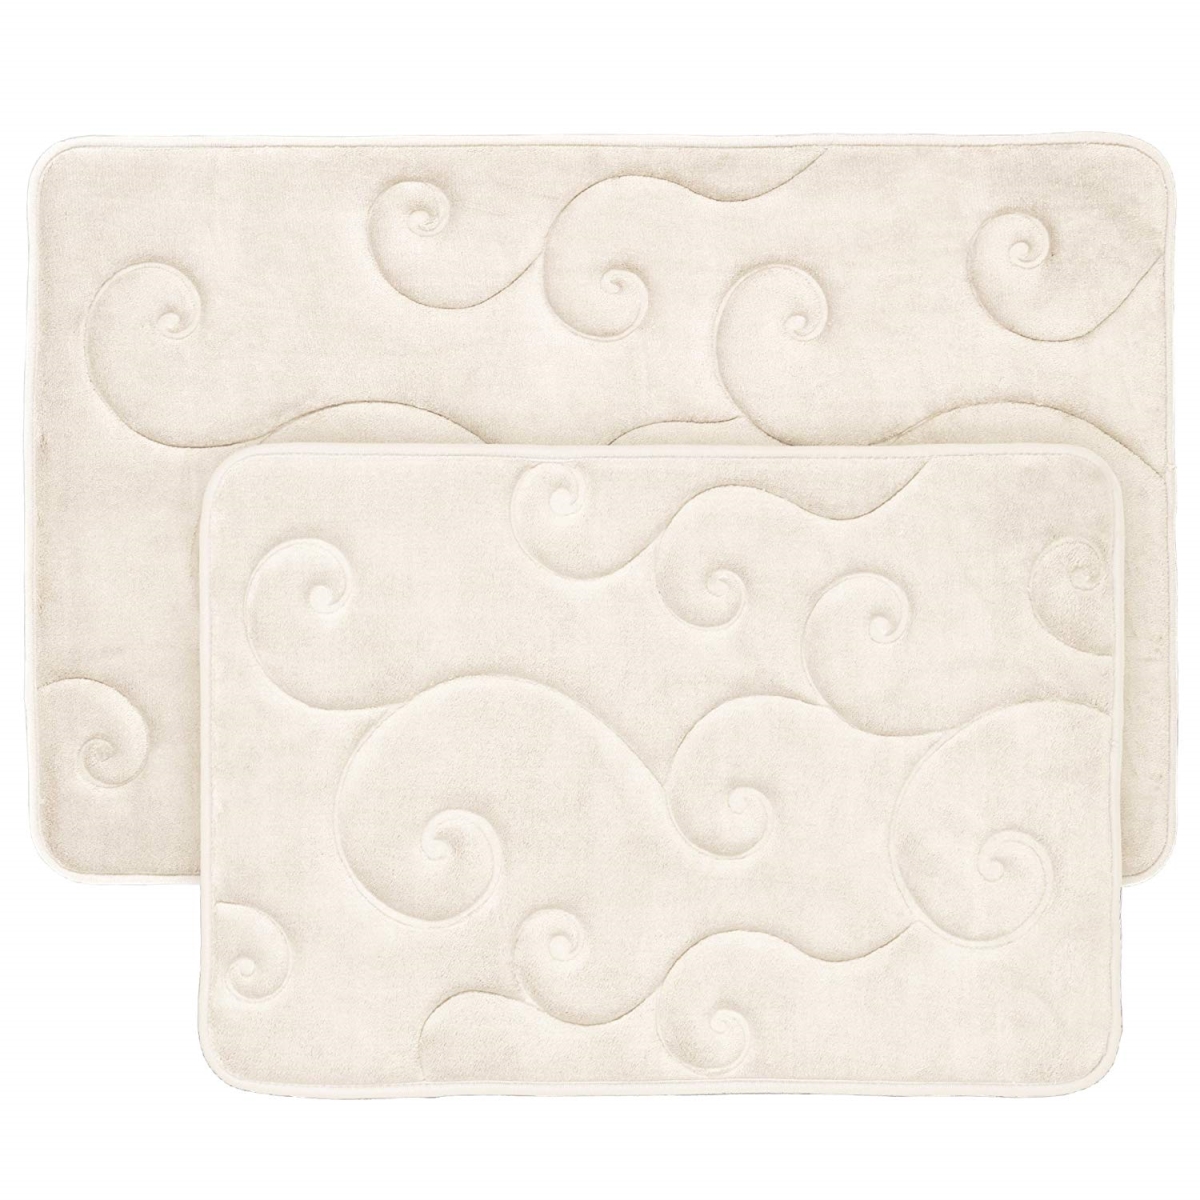 Picture of Bedford Home 67A-36765 2 Piece Memory Foam Bath Mat Set by Coral Fleece Embossed Pattern - Ivory